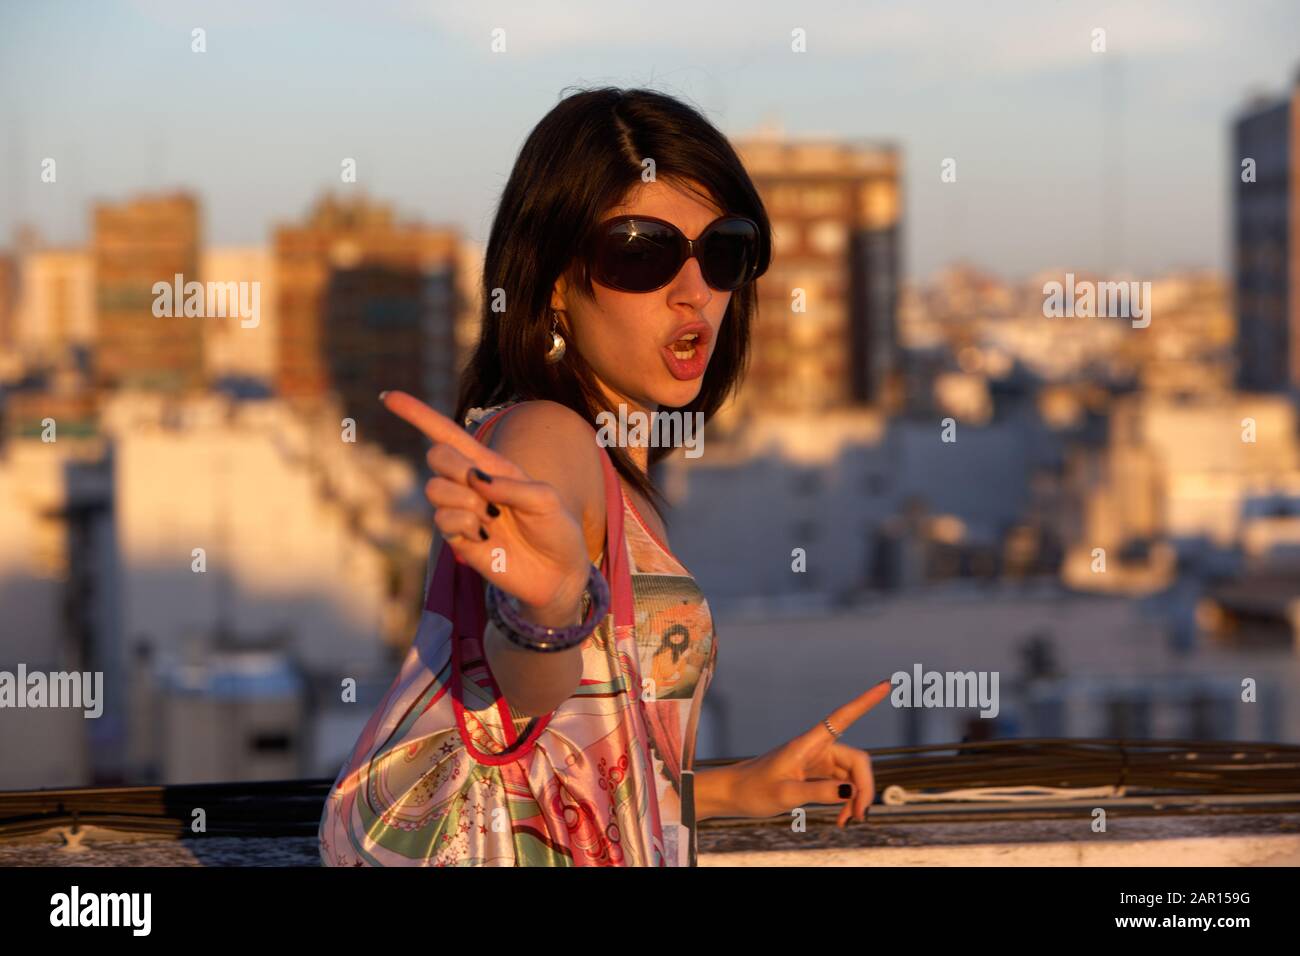 young woman waving finger at camera in buenos aires argentina  Model released image Stock Photo